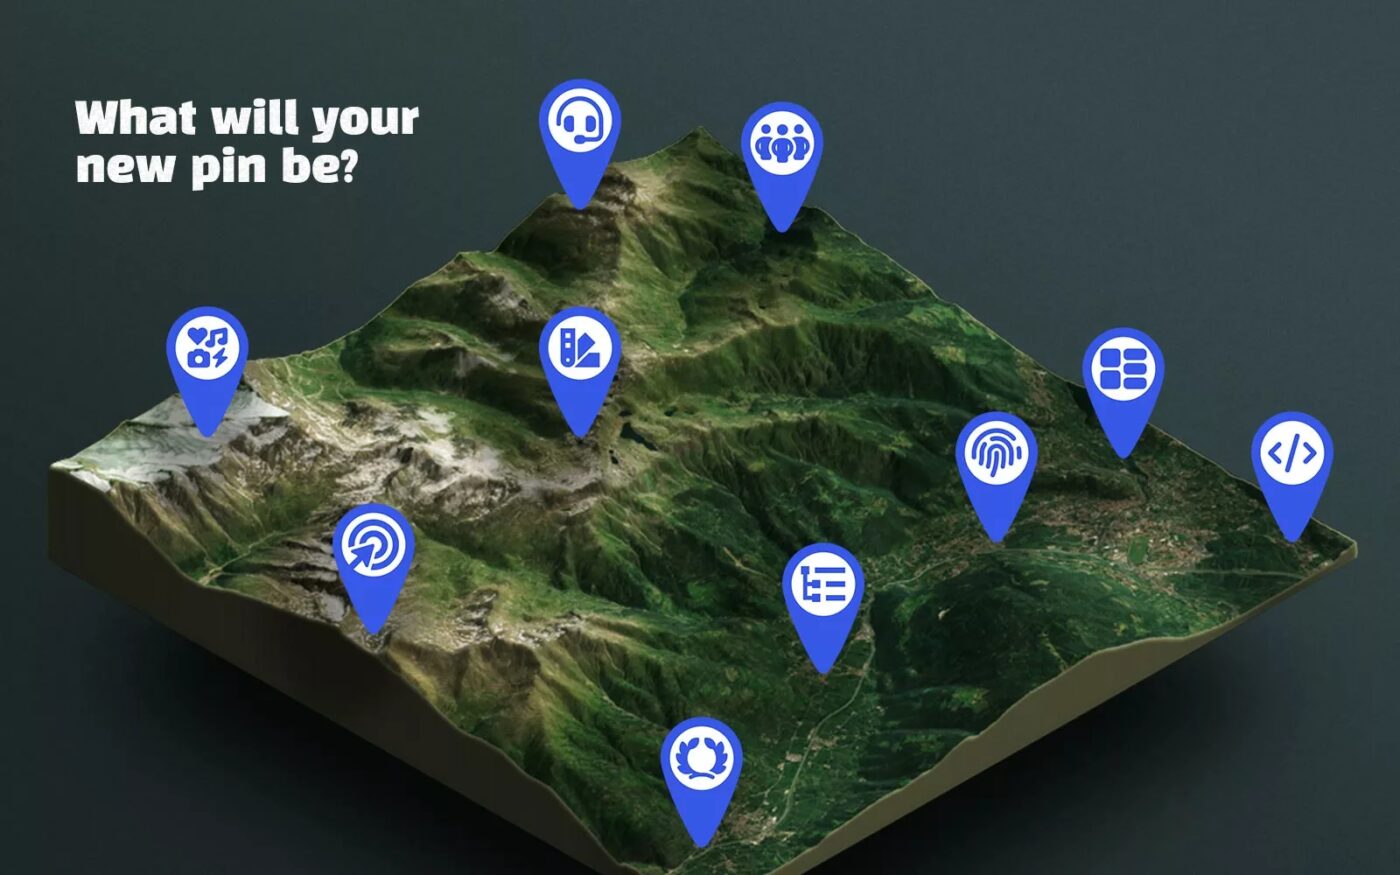 A stylized 3D map with various blue location pins containing icons for designer, developer, marketer, site builder, and more, displayed above the terrain with the text “What will your new pin be?” at the top.